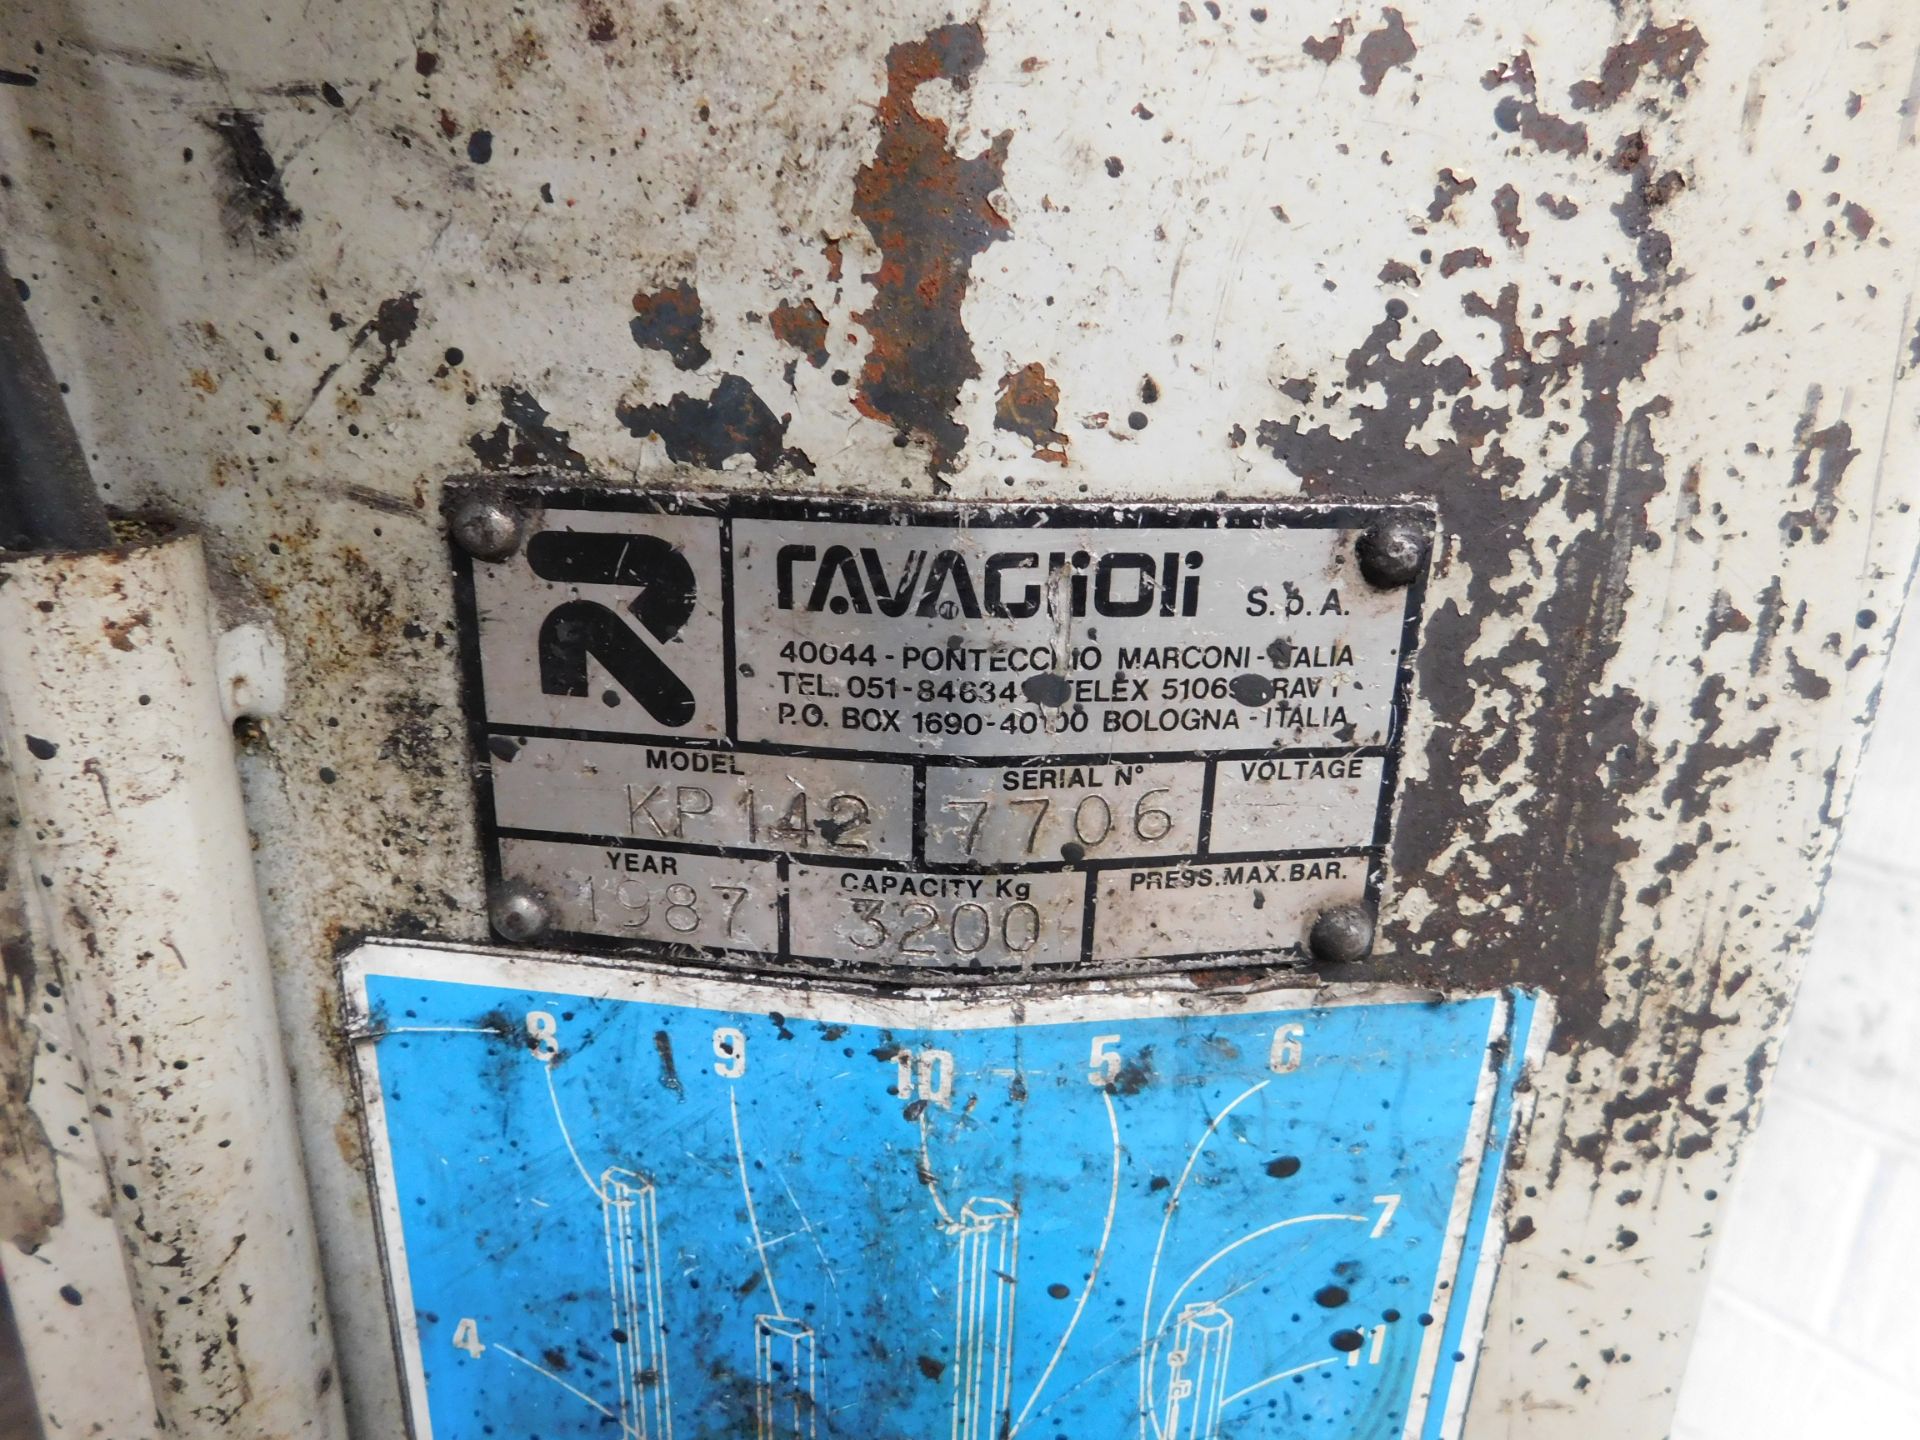 Ravaglioli KP142 3200kg 4 Poster Ramp (Year 1987) – Disconnection and removal required by a - Image 7 of 7